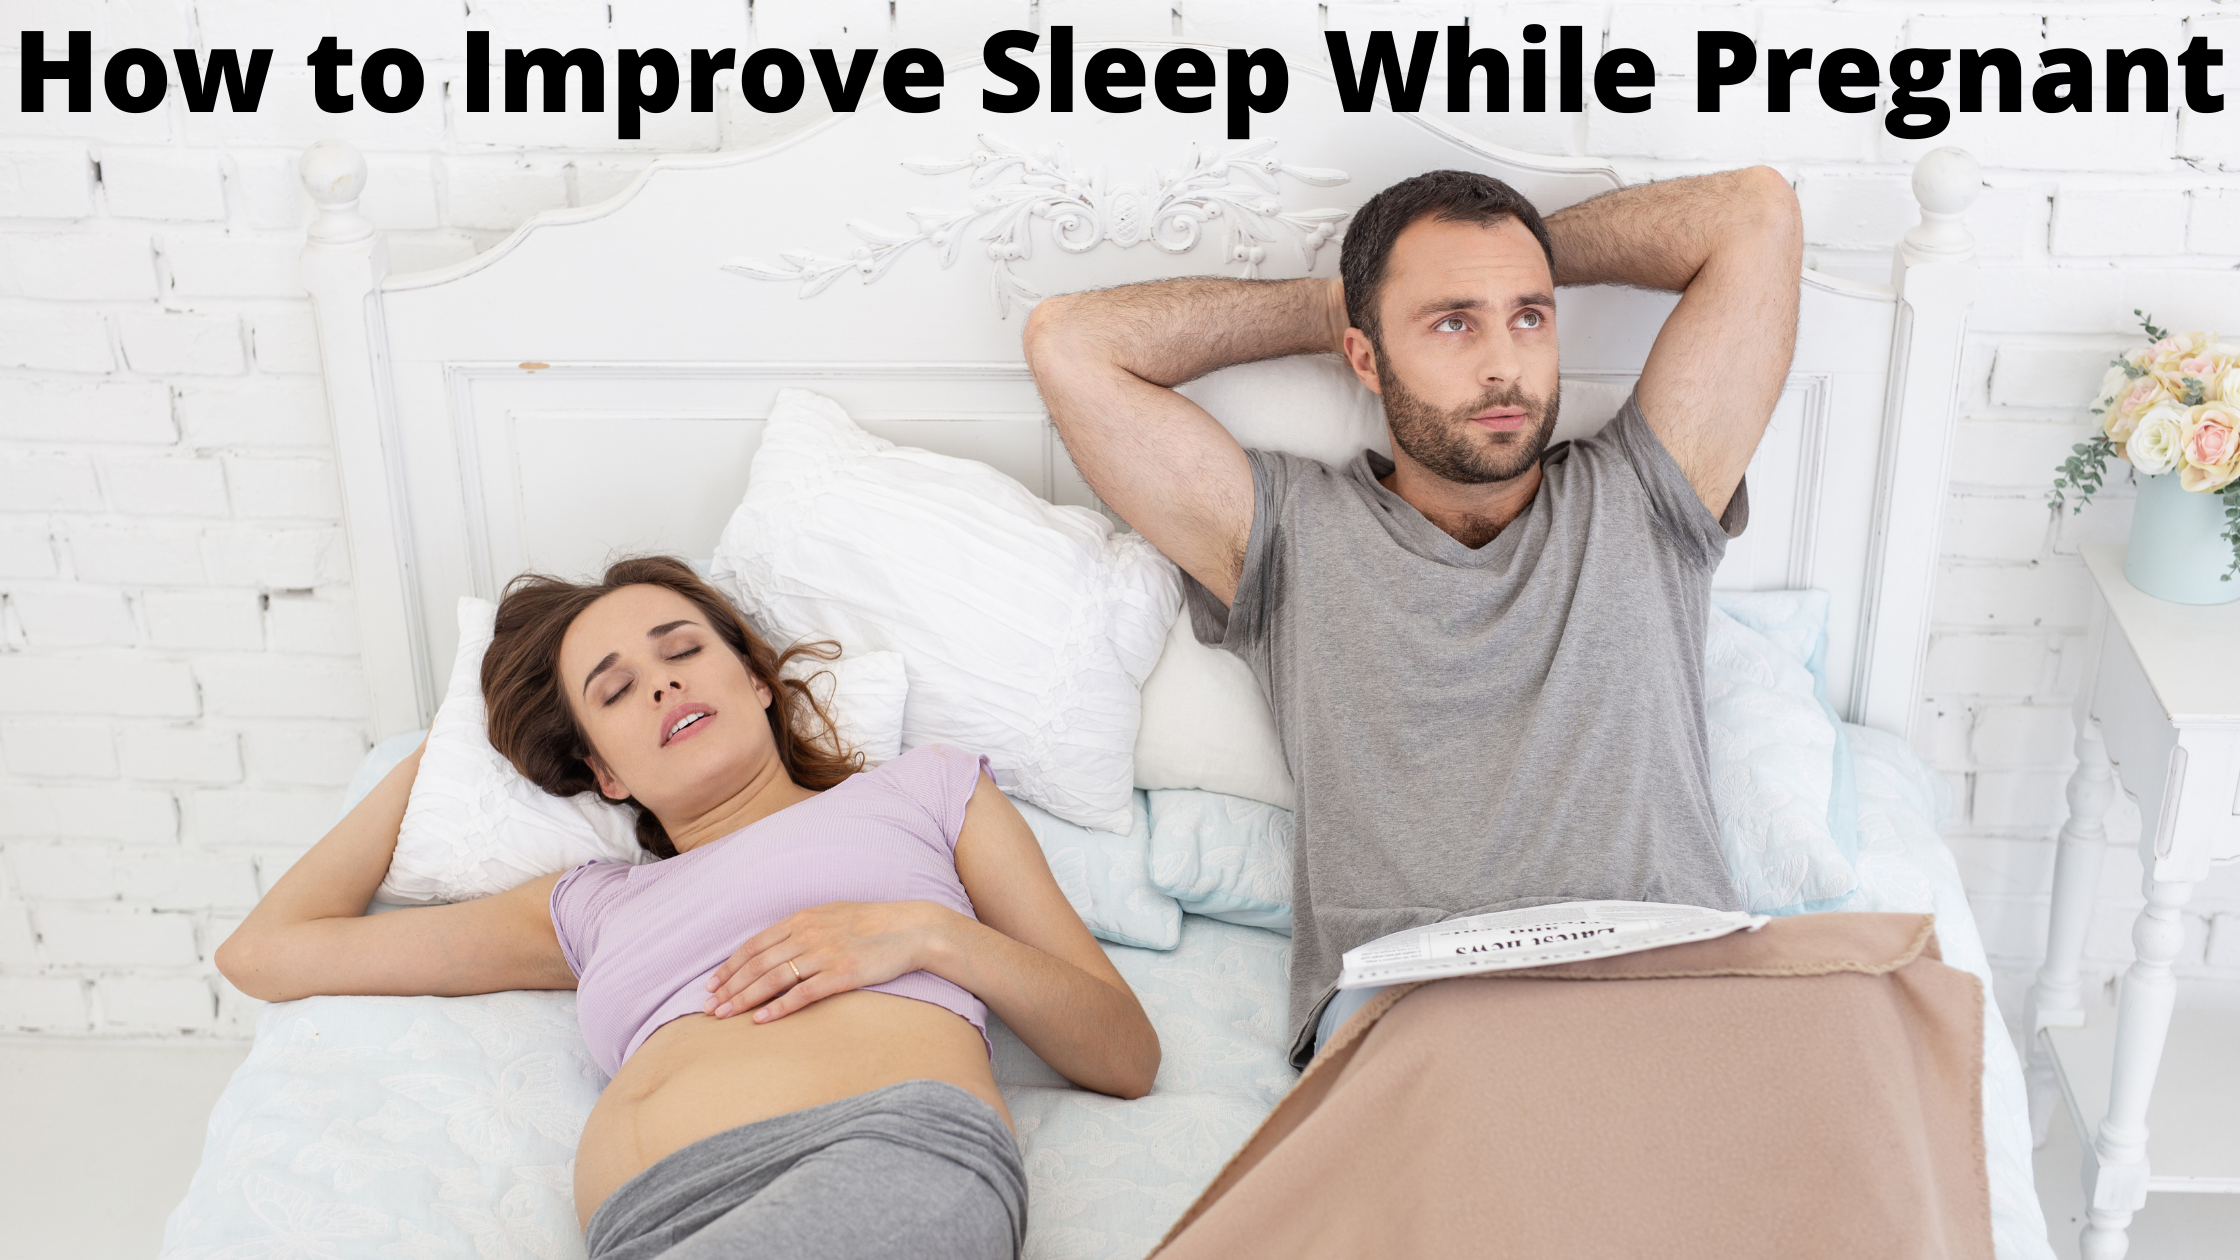 How to Improve Sleep While Pregnant